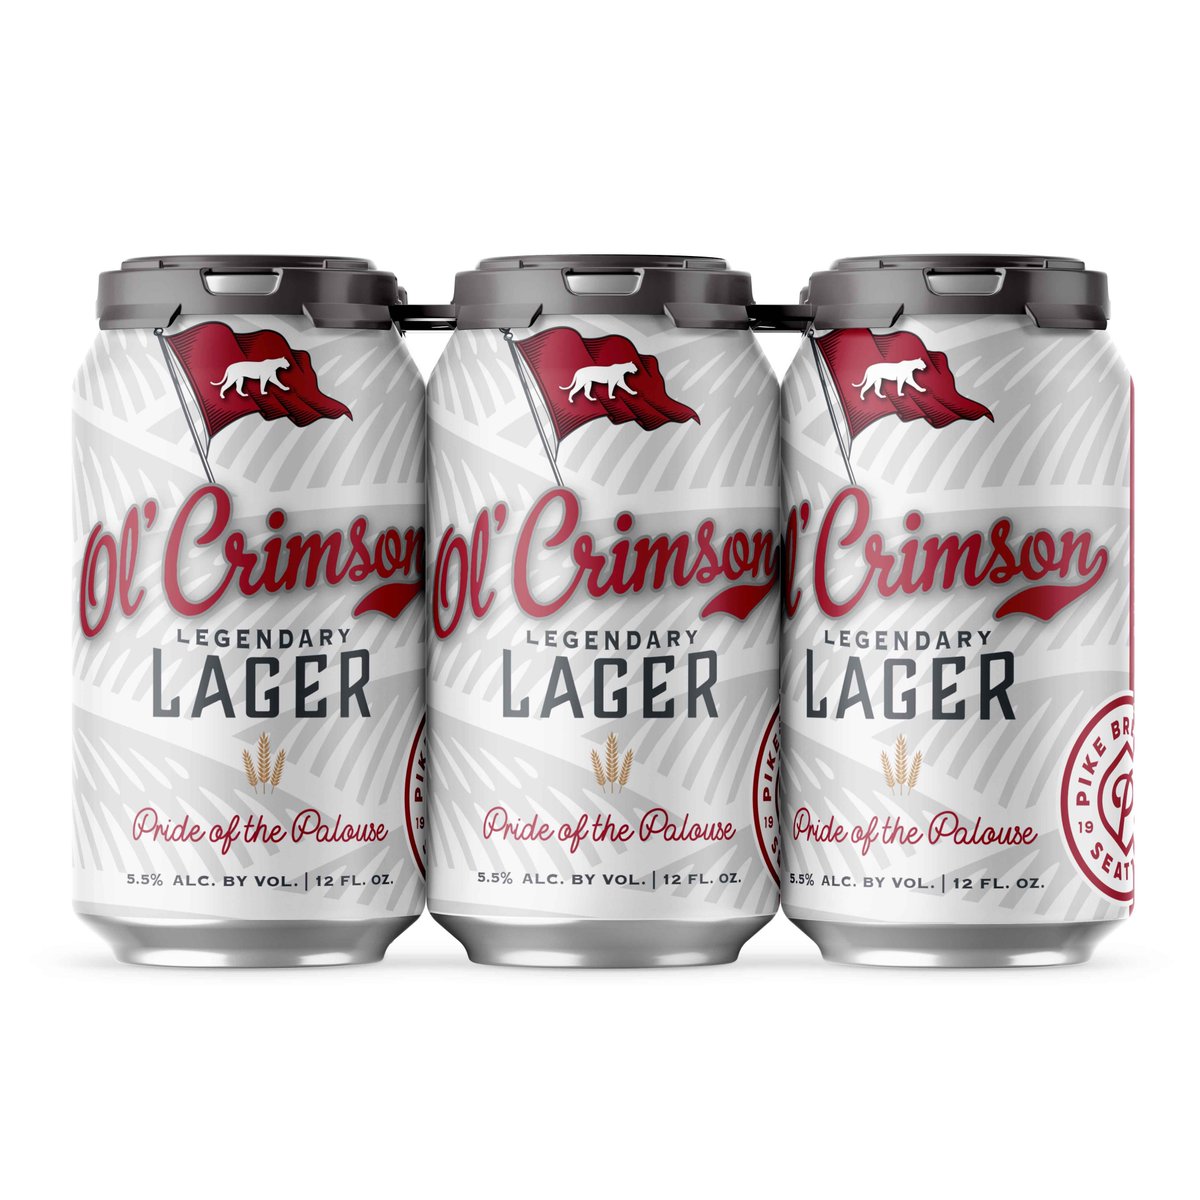 Washington State University’s Ol’ Crimson Booster Club and Cougar Collective have partnered with Pike Brewing on the newly released Ol’ Crimson Legendary Lager. Details: brewpublic.com/beer-releases/…